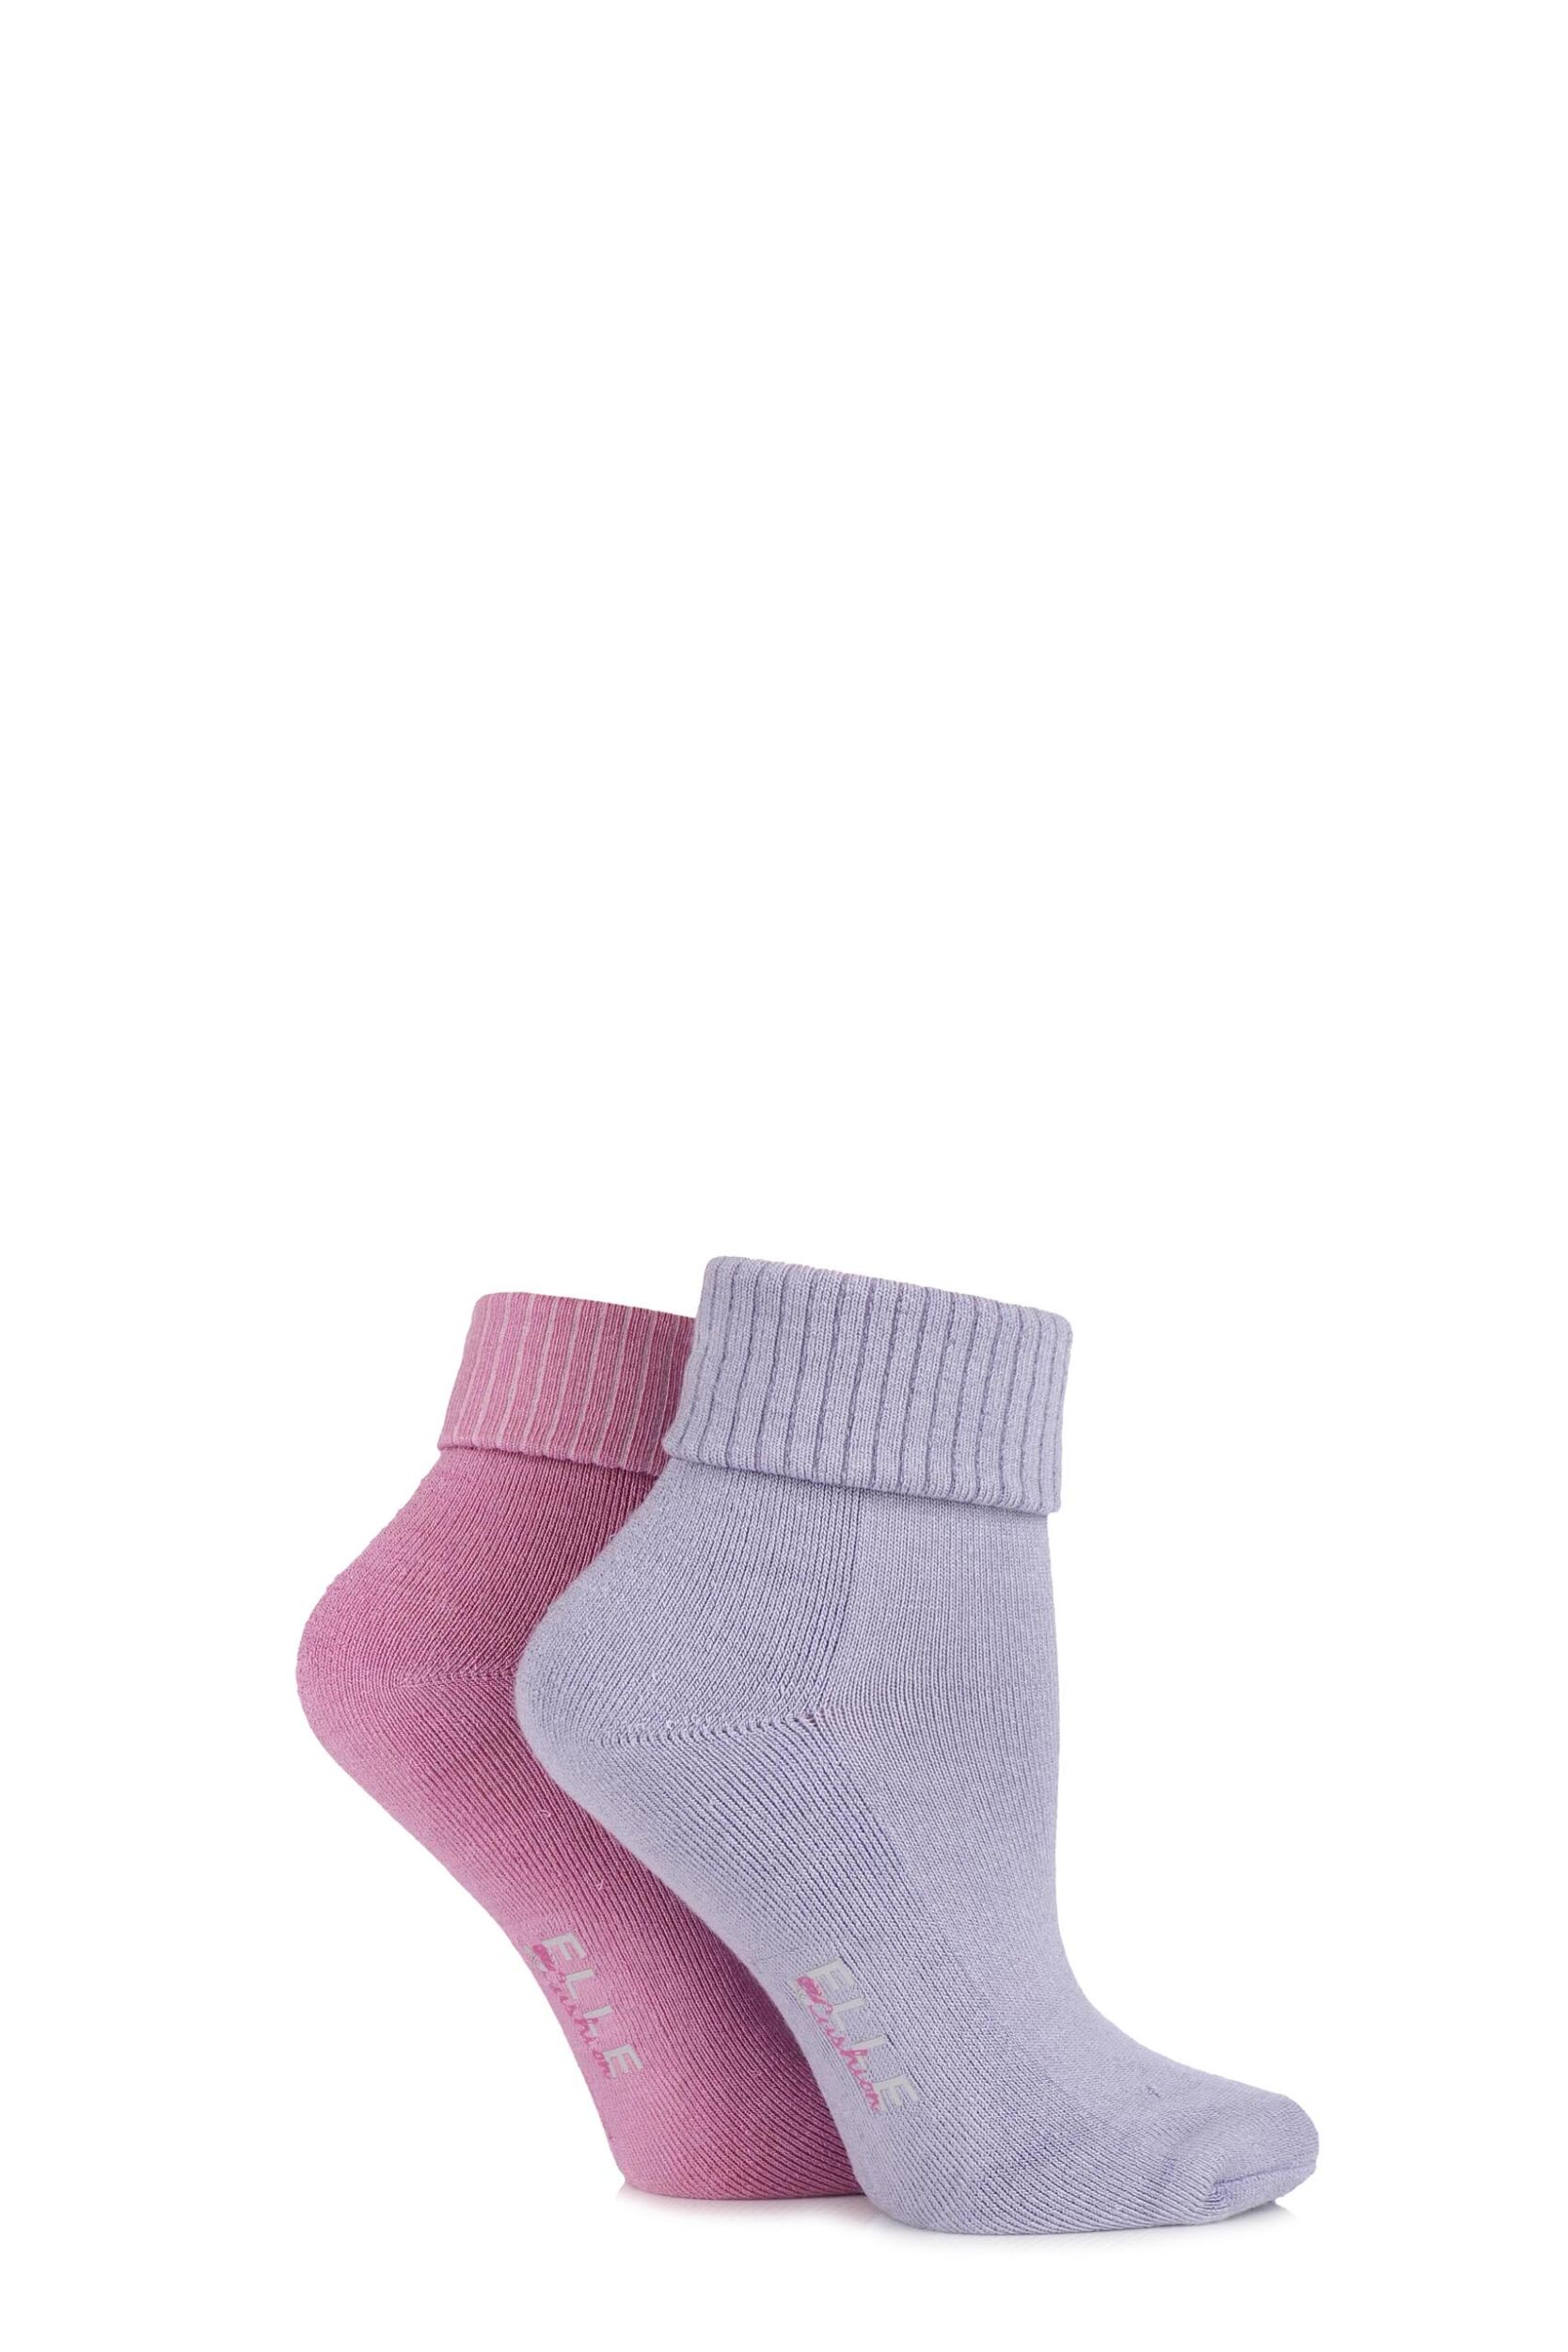 Ladies 2 Pair Elle Bamboo Ankle Socks With Cushion Sole | eBay